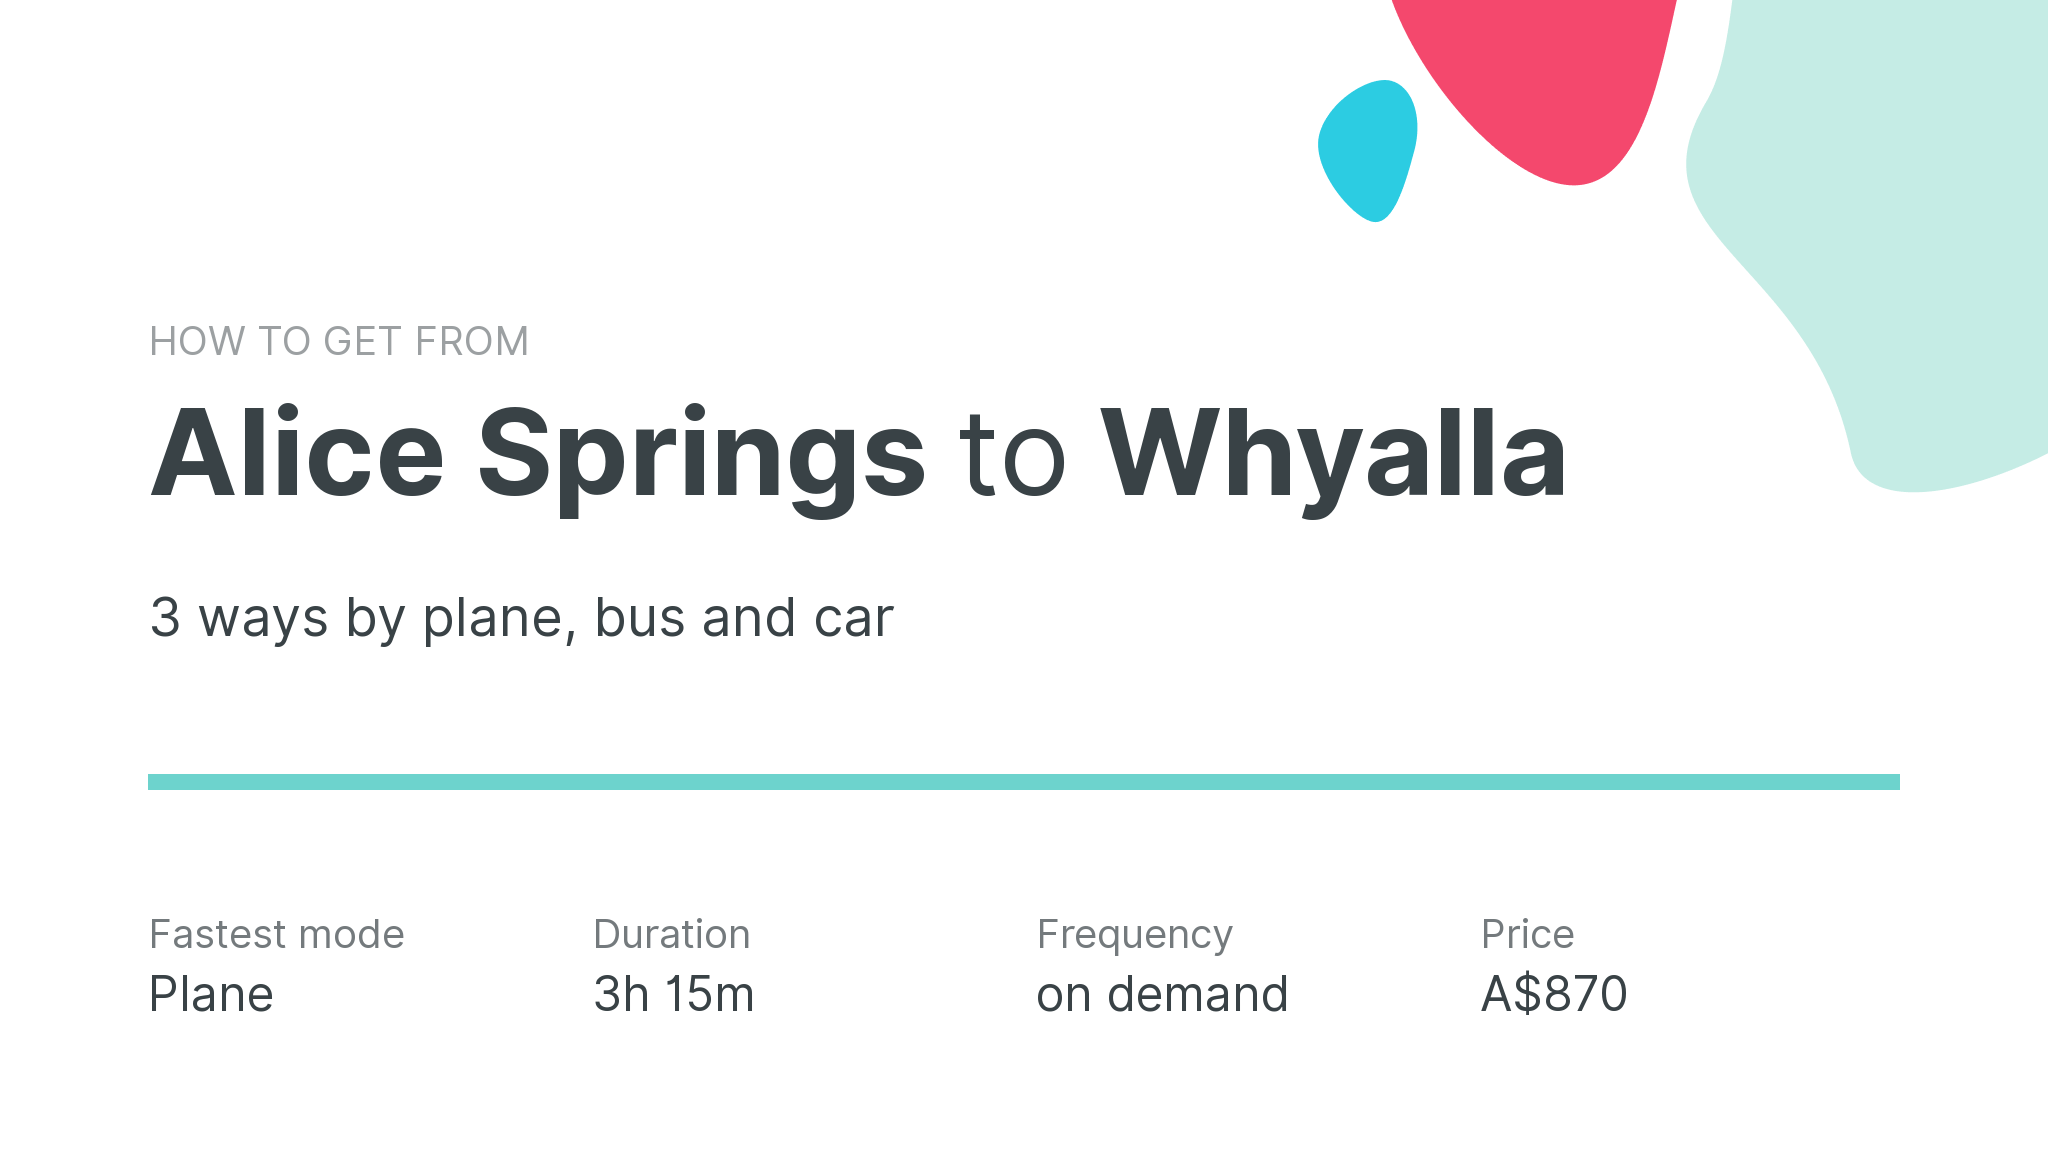 How do I get from Alice Springs to Whyalla